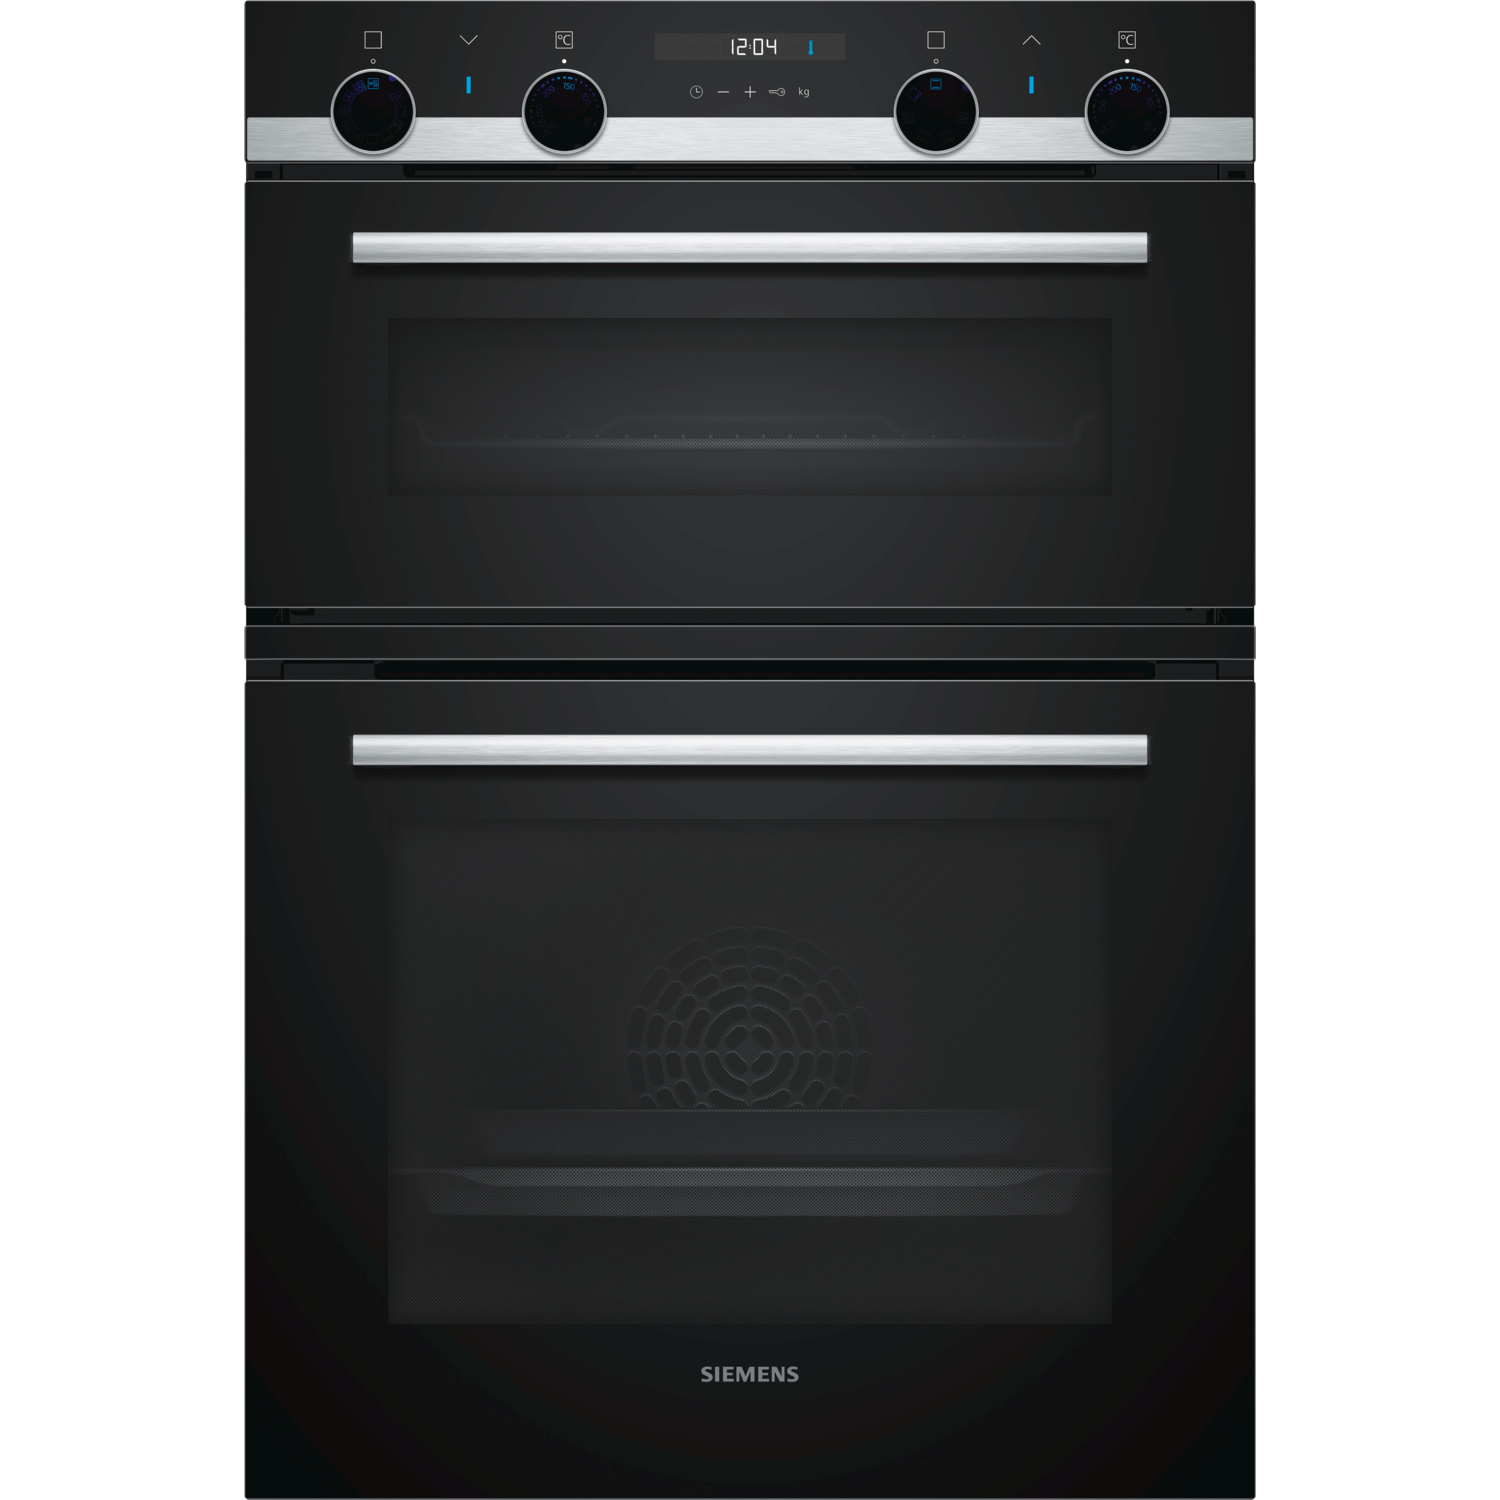 Refurbished Siemens iQ500 MB535A0S0B 60cm Double Built In Electric Oven Stainless Steel